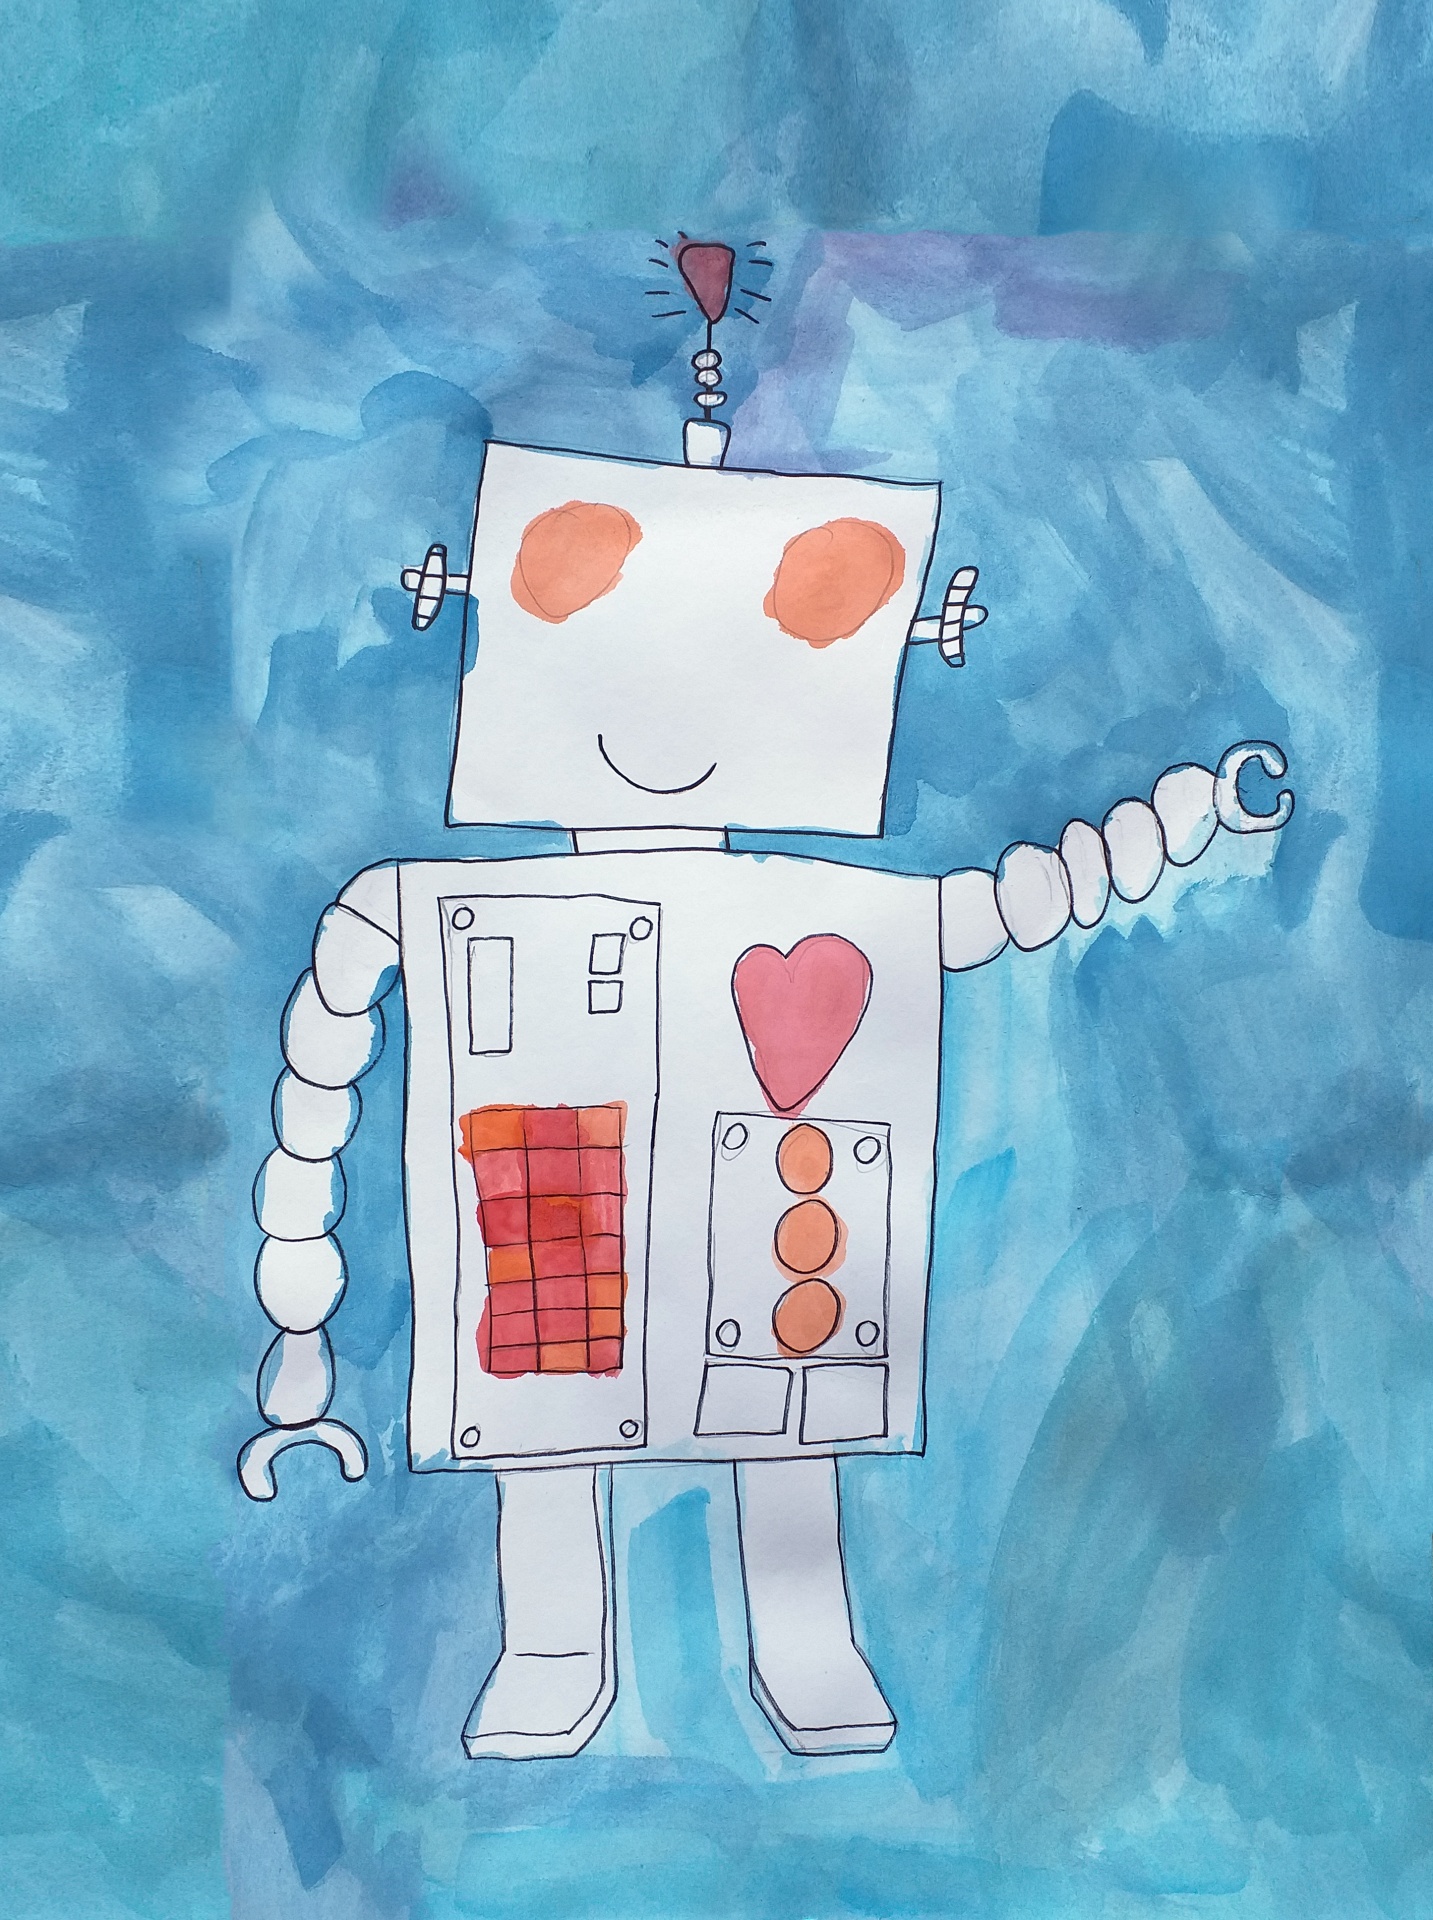 robot, friend, comrade, drawing, fine arts, assistant, cute, bot, consultant, fantasy, cyborg, peek out, children draw, paints, children, draw, artists, art lessons, children's drawing, children's creativity